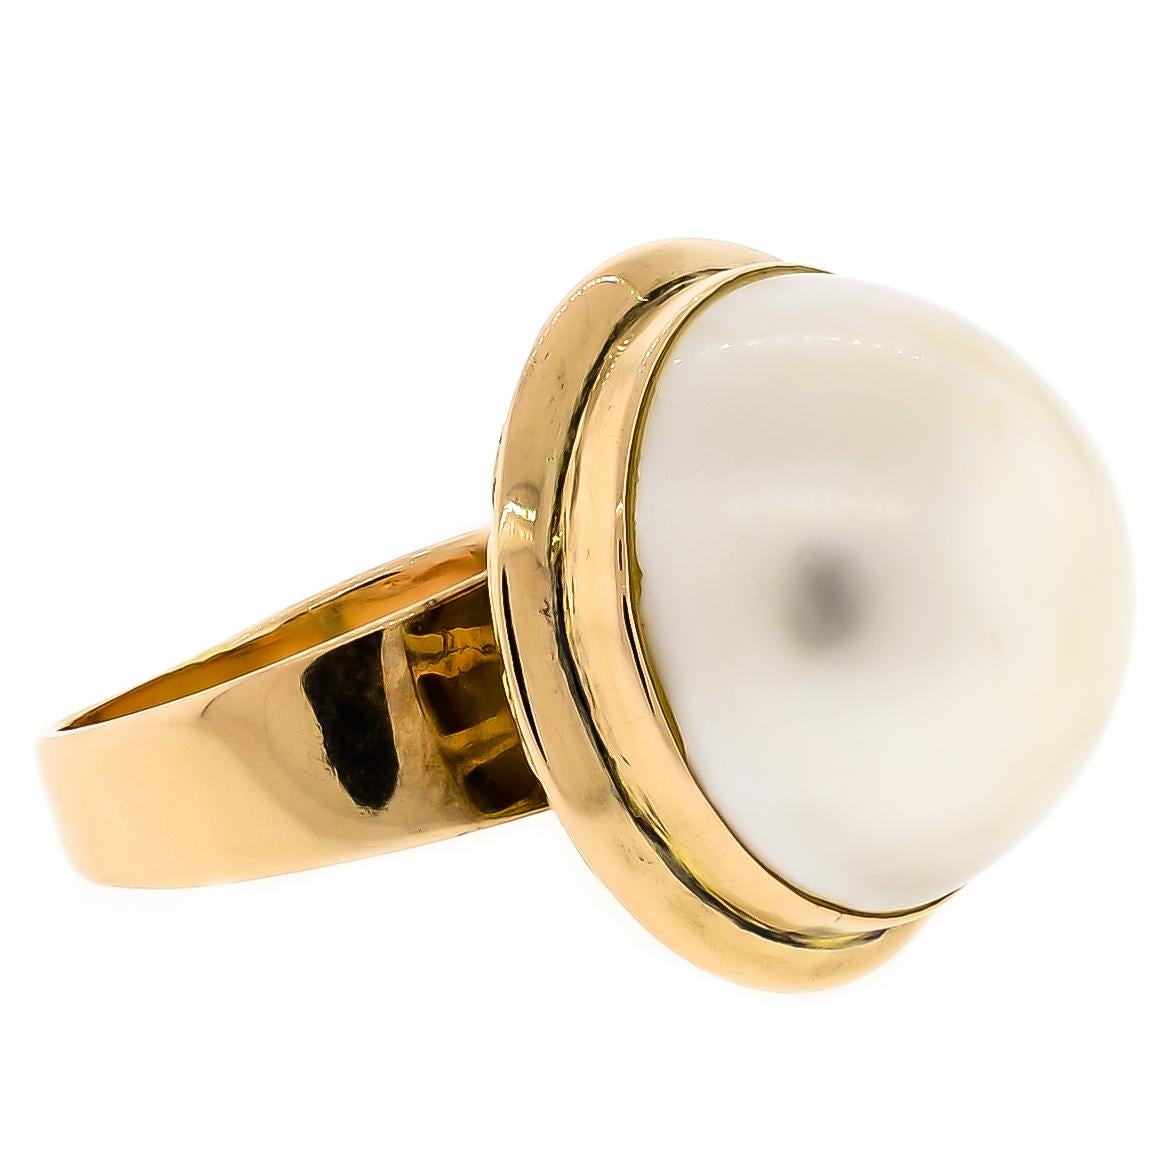 This fantastic suite contains a pair of luxurious large mabé pearl earrings and one large mabé pearl ring all crafted in 14 karat gold. The exquisite lustrous mabé pearl earrings backed with posts and omega clips for comfort and safety molded out of